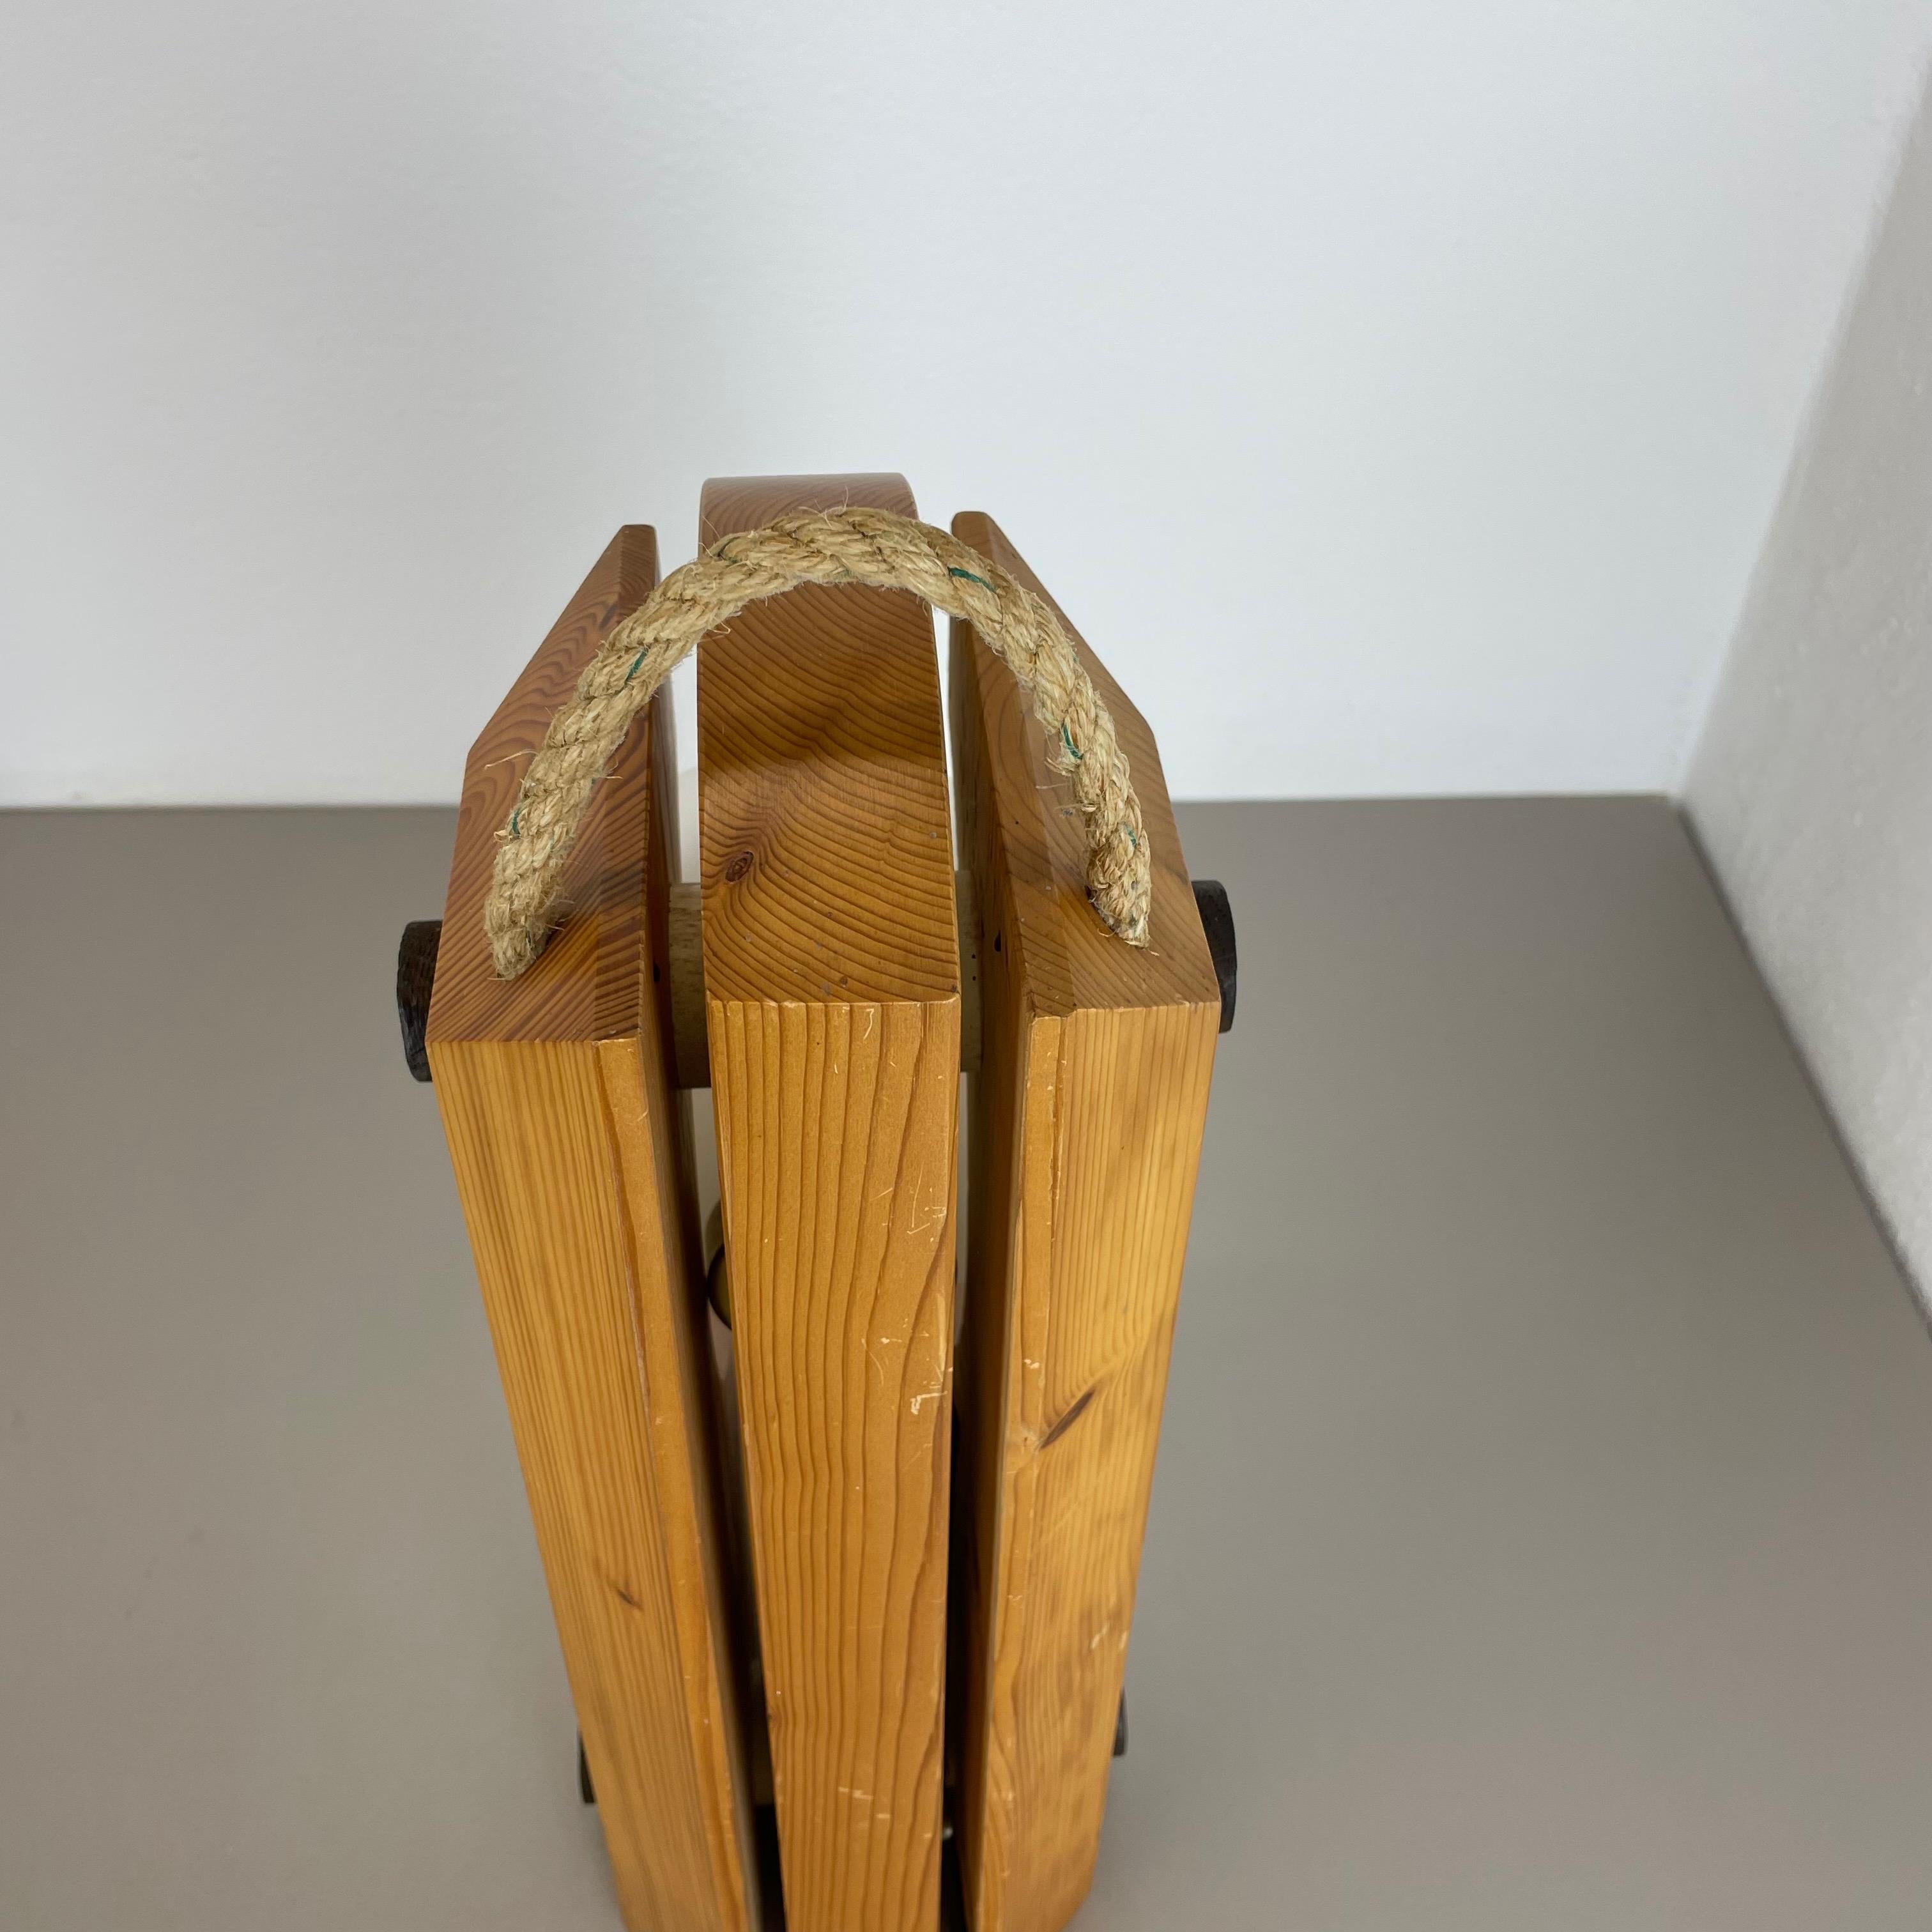 Large Organic Sculptural PINE Wooden Table Light by Temde Lights, Germany 1970s For Sale 10